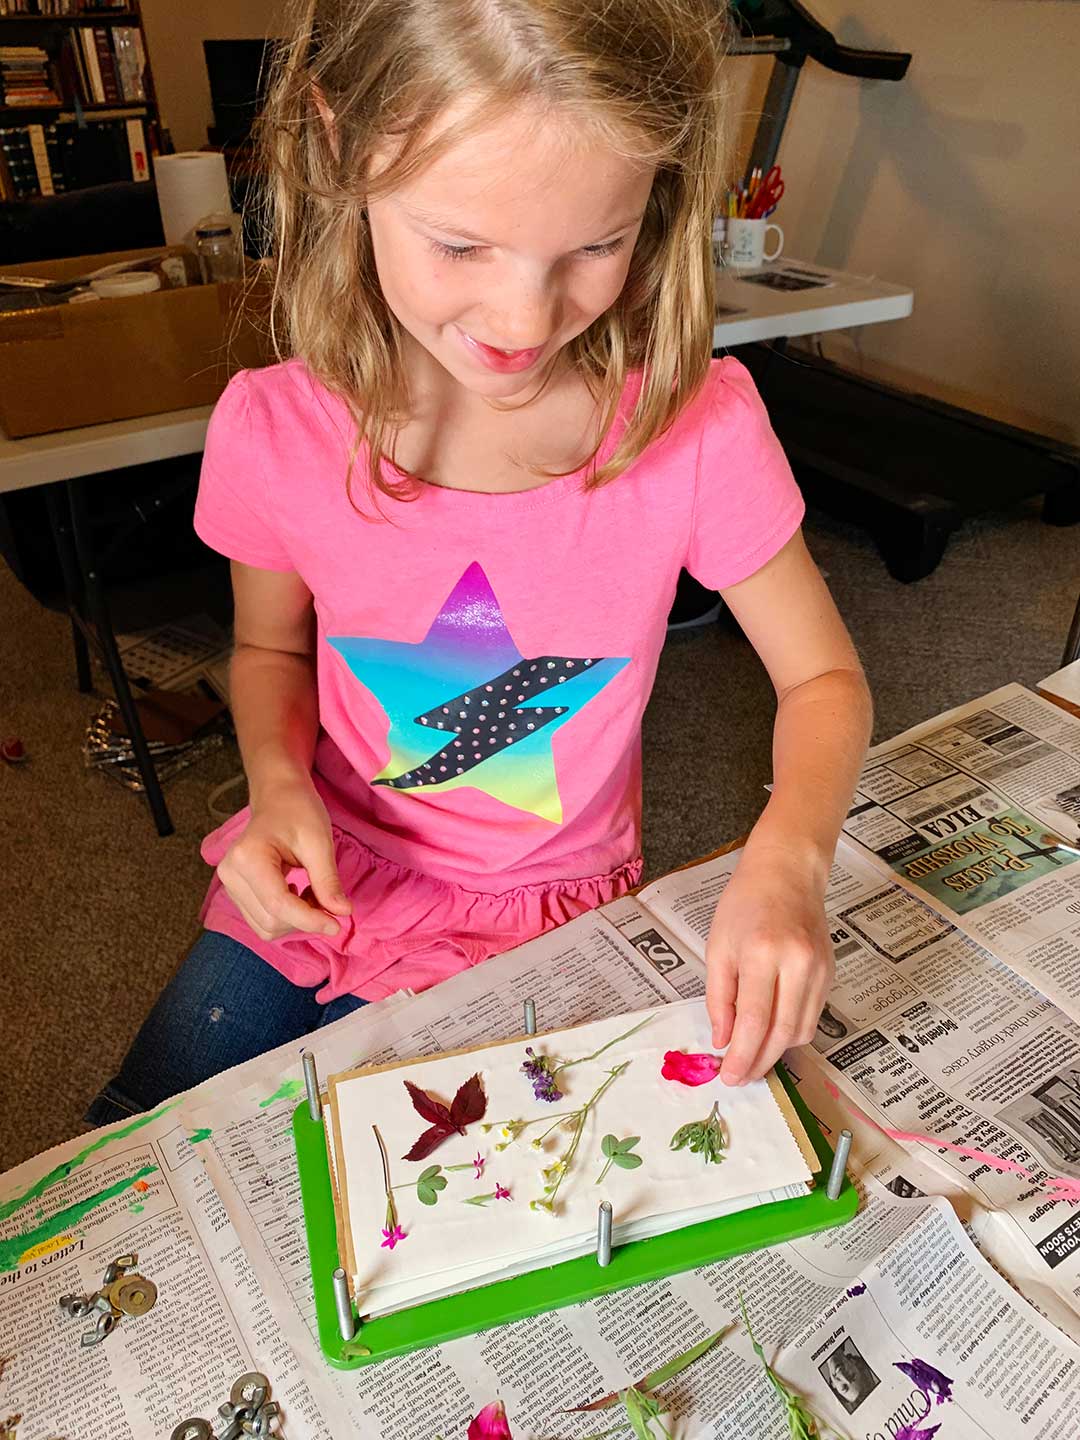 Young girl in pink shirt with star on it lays out flowers and leaves to press in her wood press.